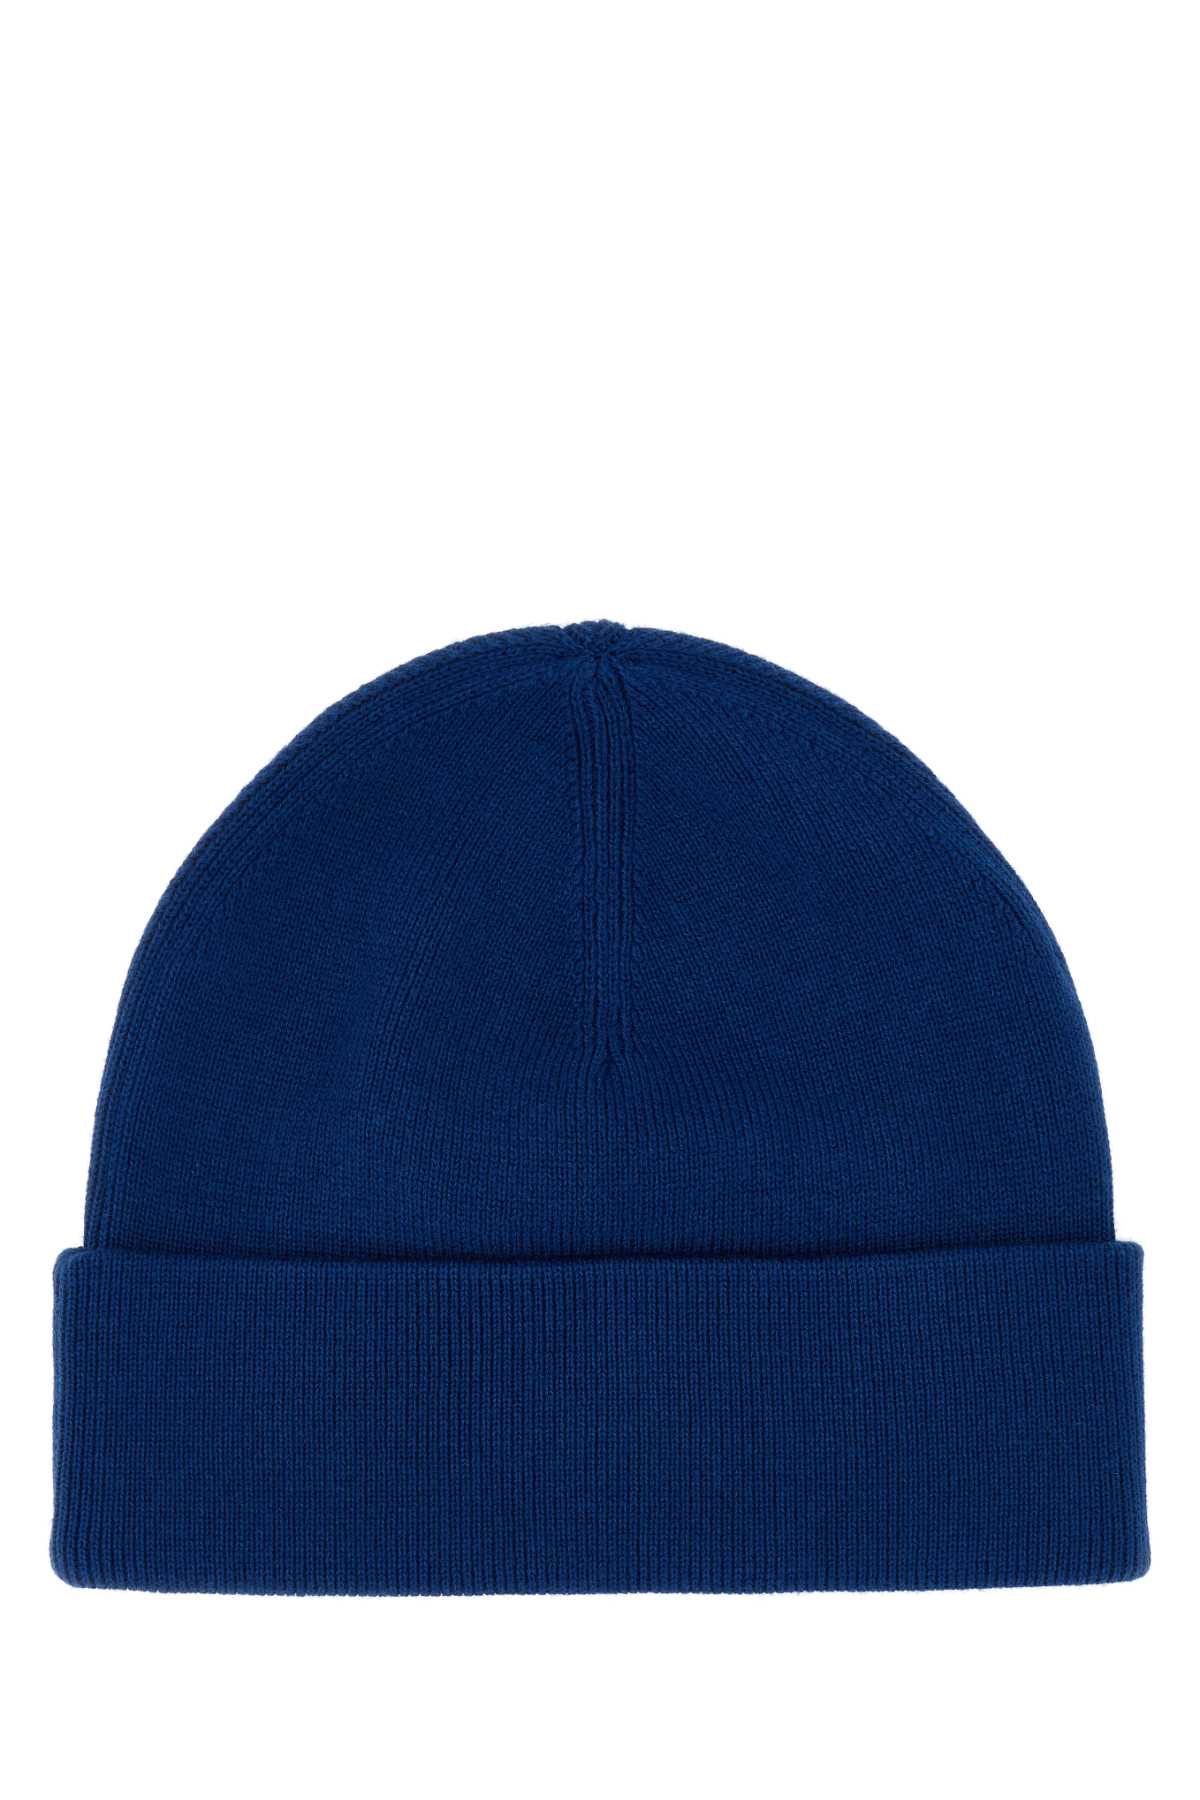 Fred Perry Electric Blue Wool Blend Beanie Hat In Navy